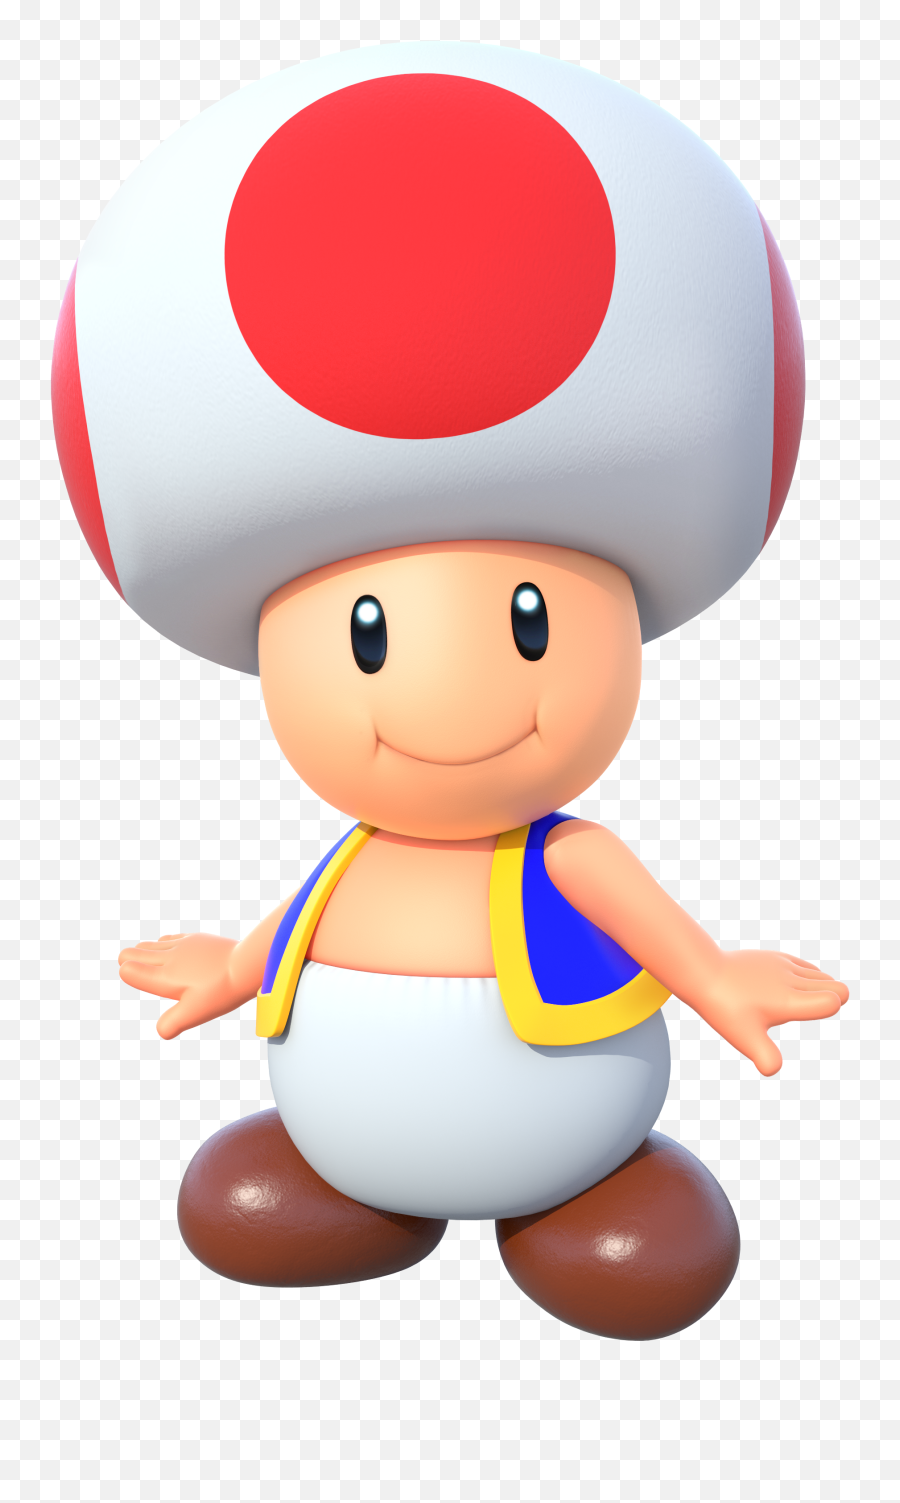 Whats Your First Impression Of Me - Toad Mario Emoji,Pervy Eyes Emoji